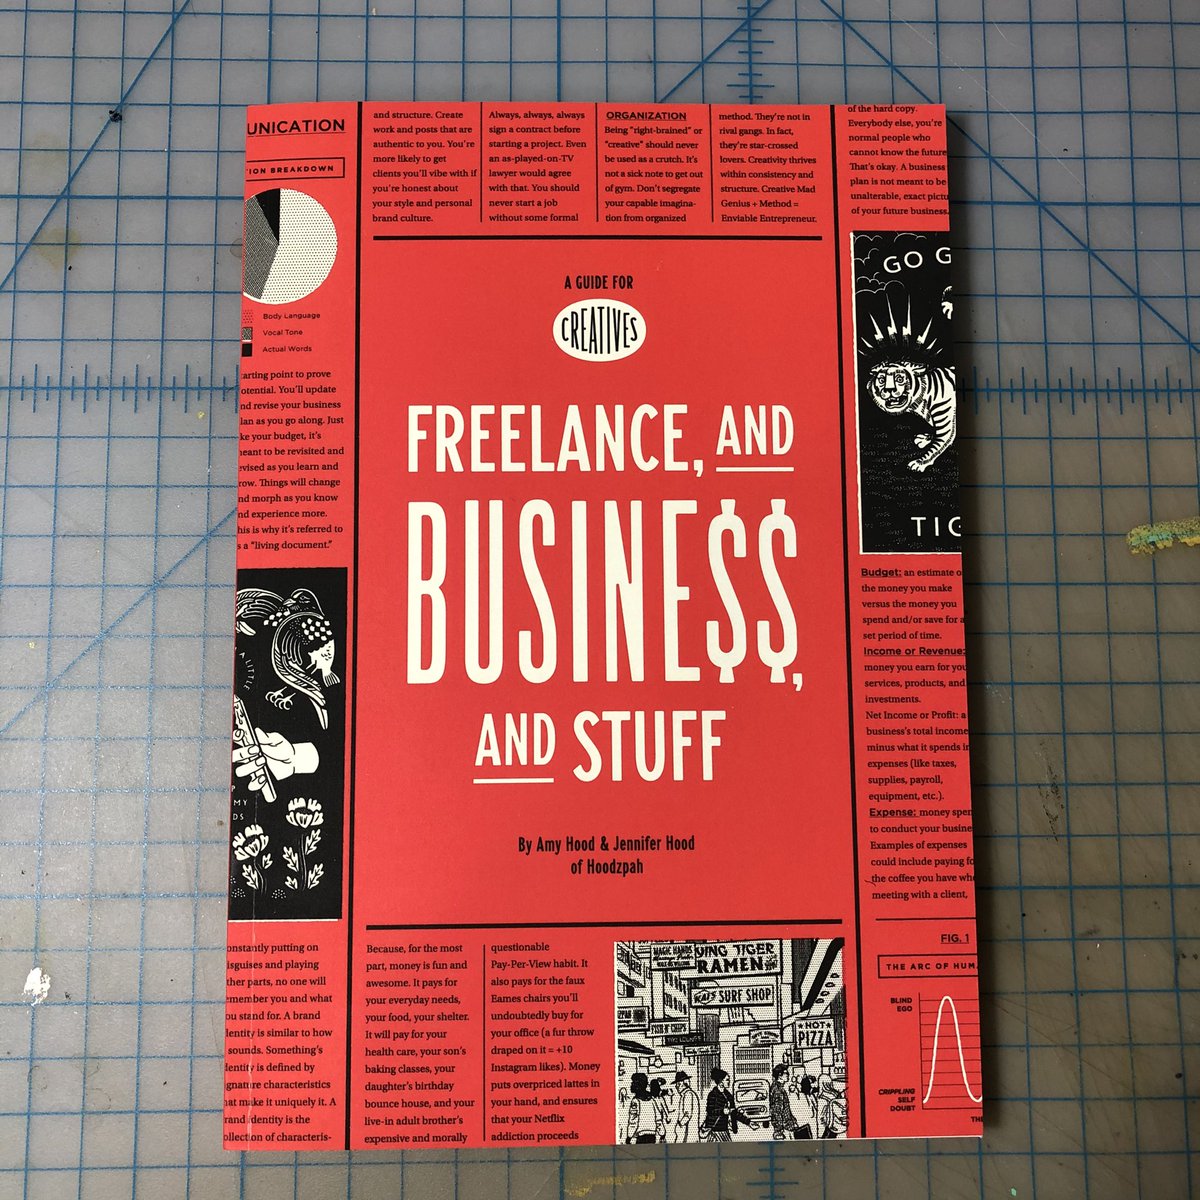 Freelance, and business, and stuff by  @hoodzpahdesign On building a brand, business plan, budget, taxes and more! I wish this came out when I started 11 years ago.